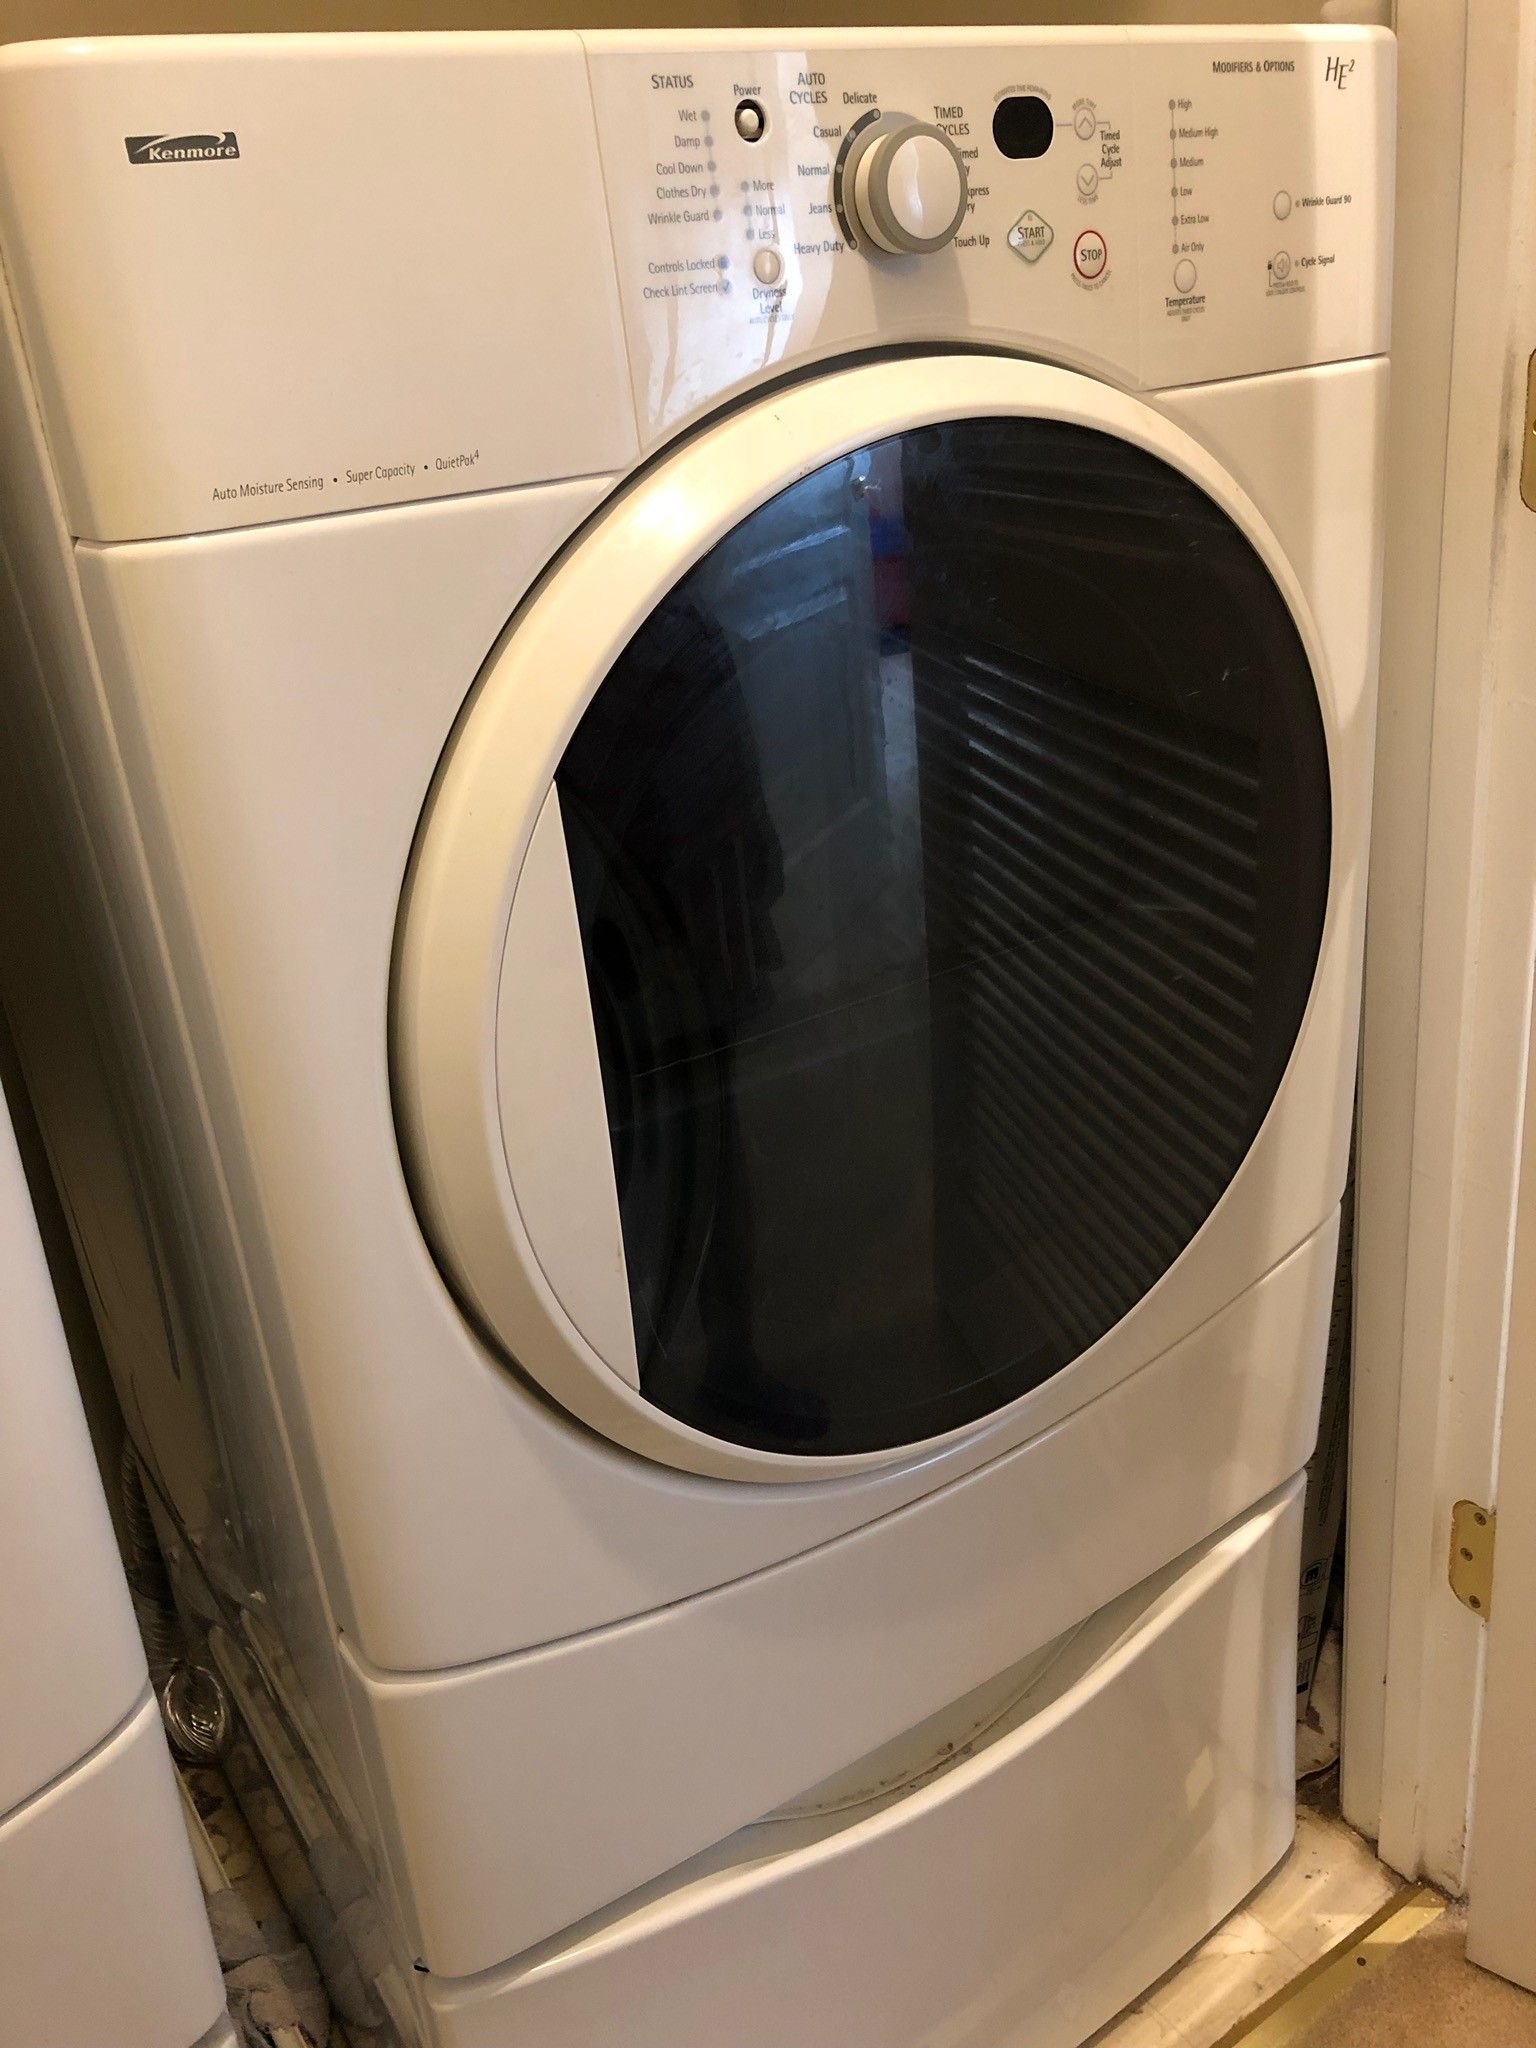 Kenmore front loading washer and dryer work great!